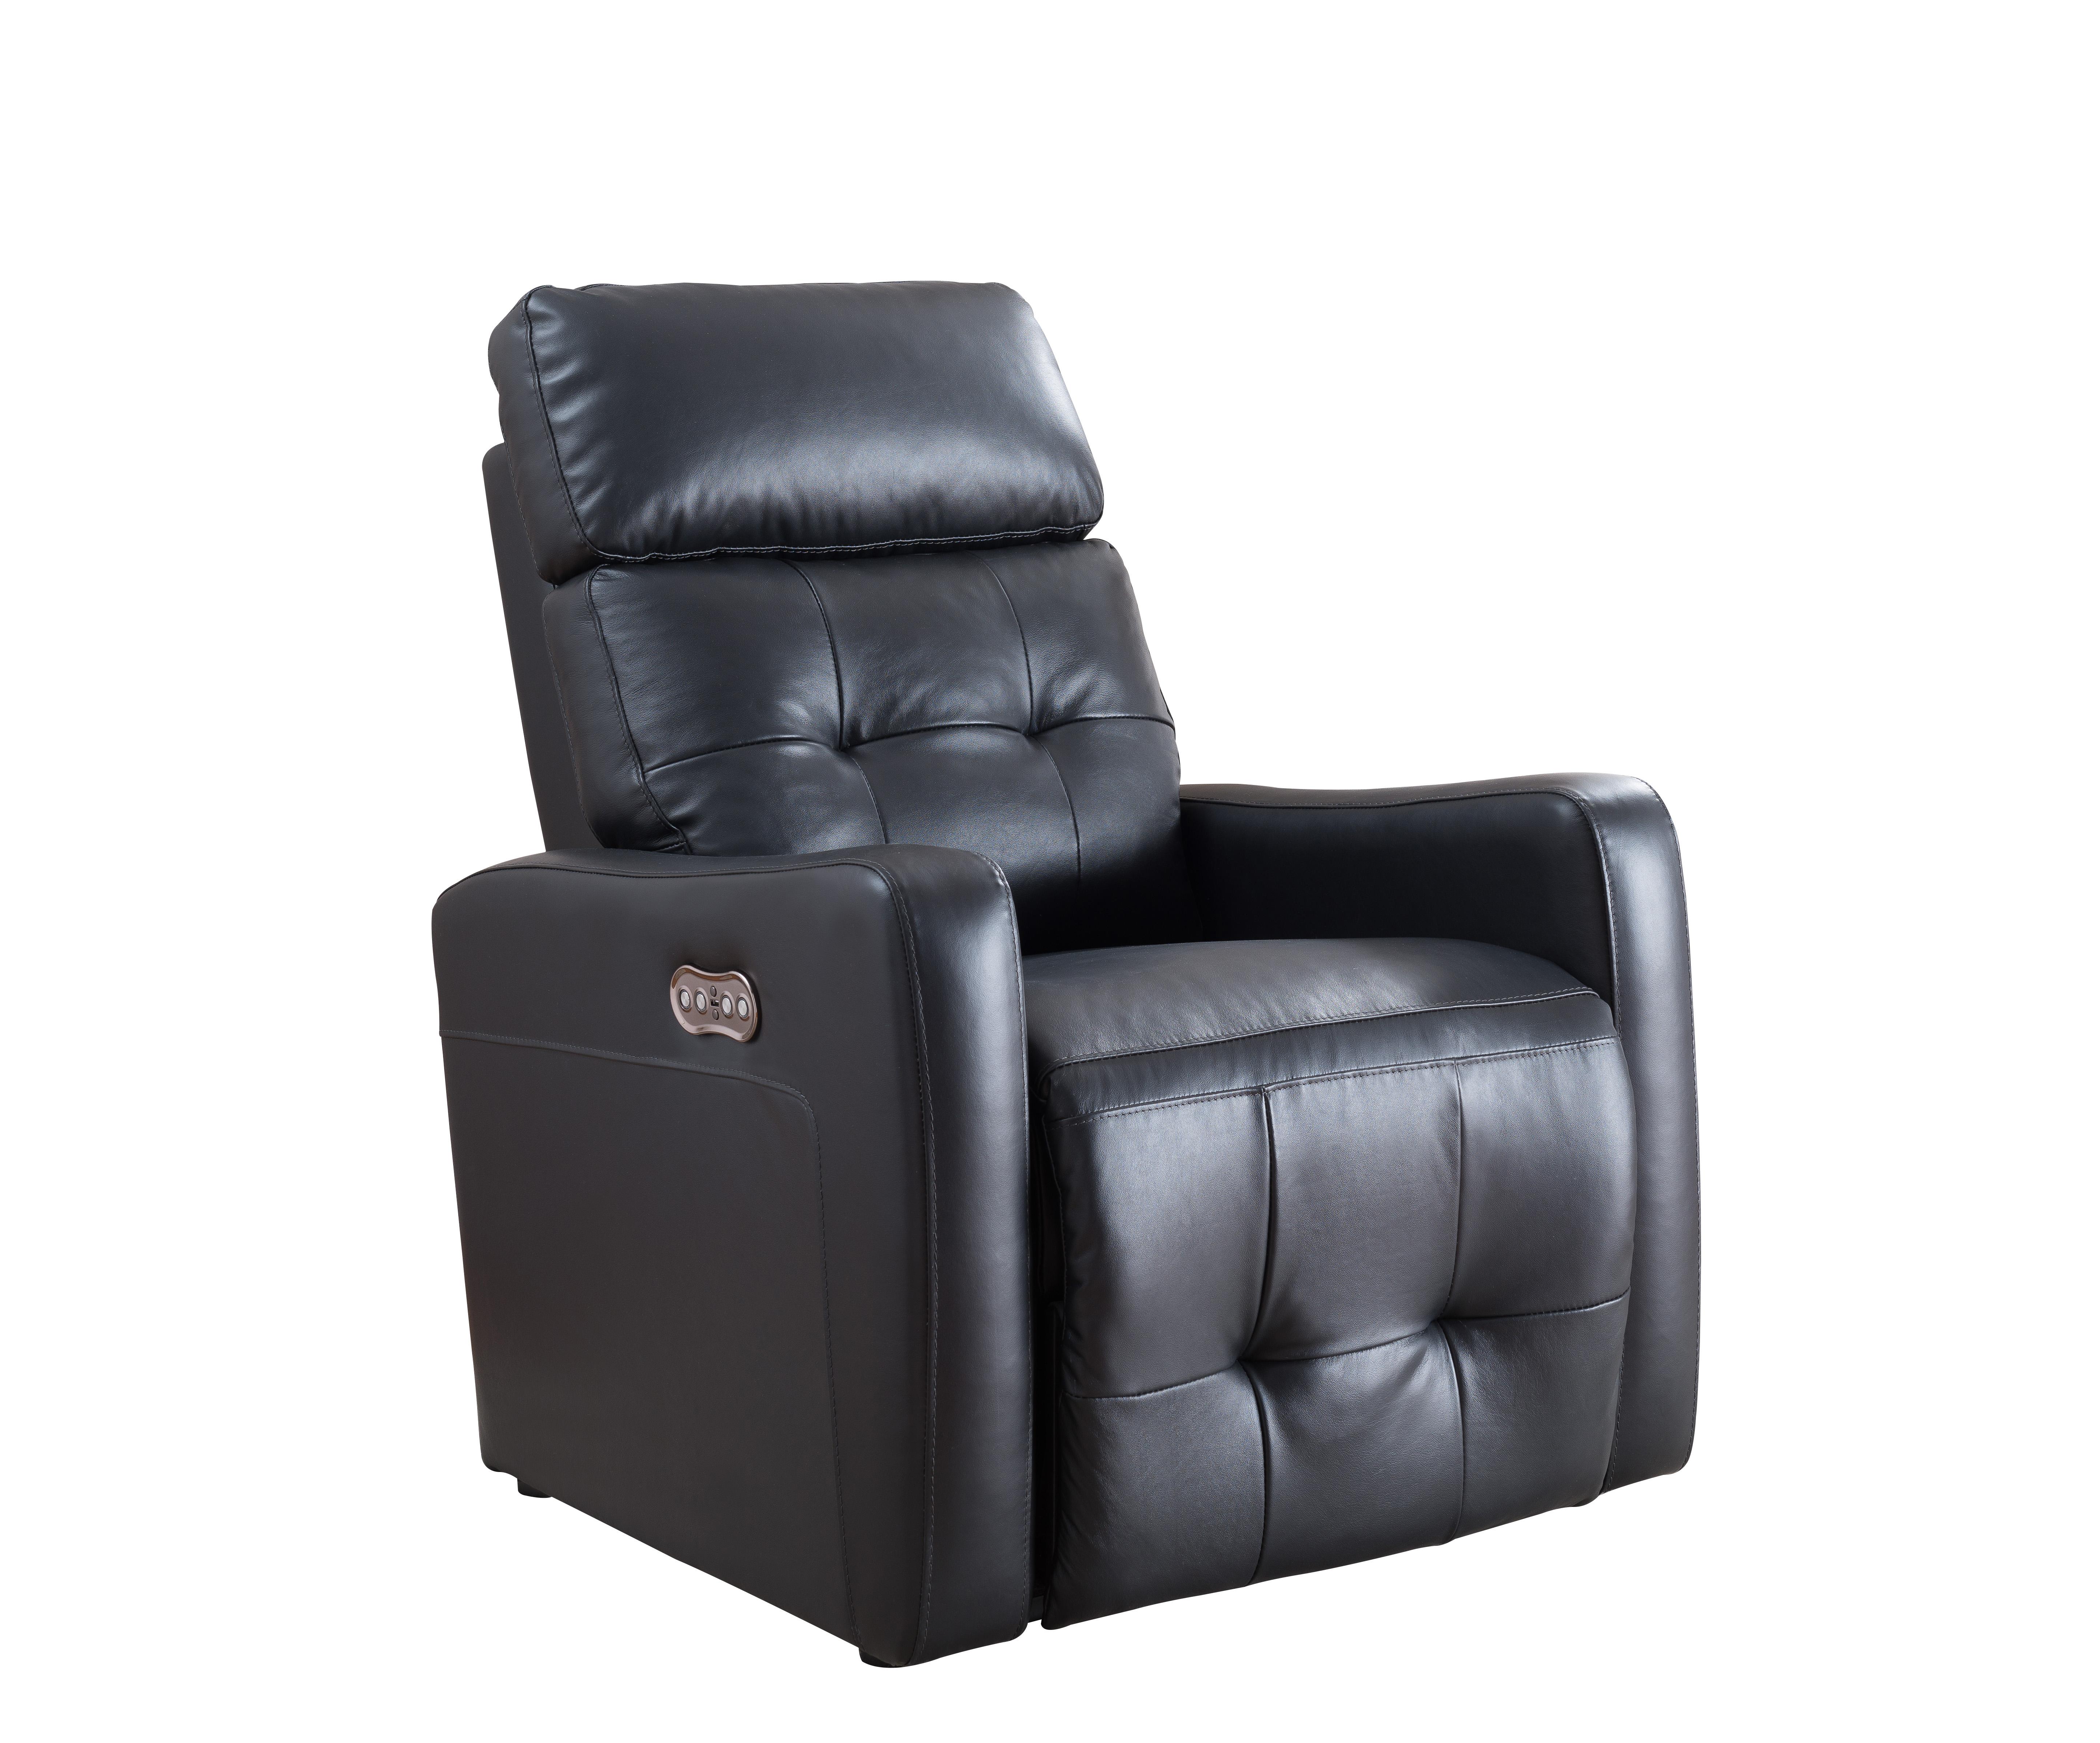 Contemporary Reclining Chair Anna ANNA-BLACK-PRC-1 in Black Leather Match